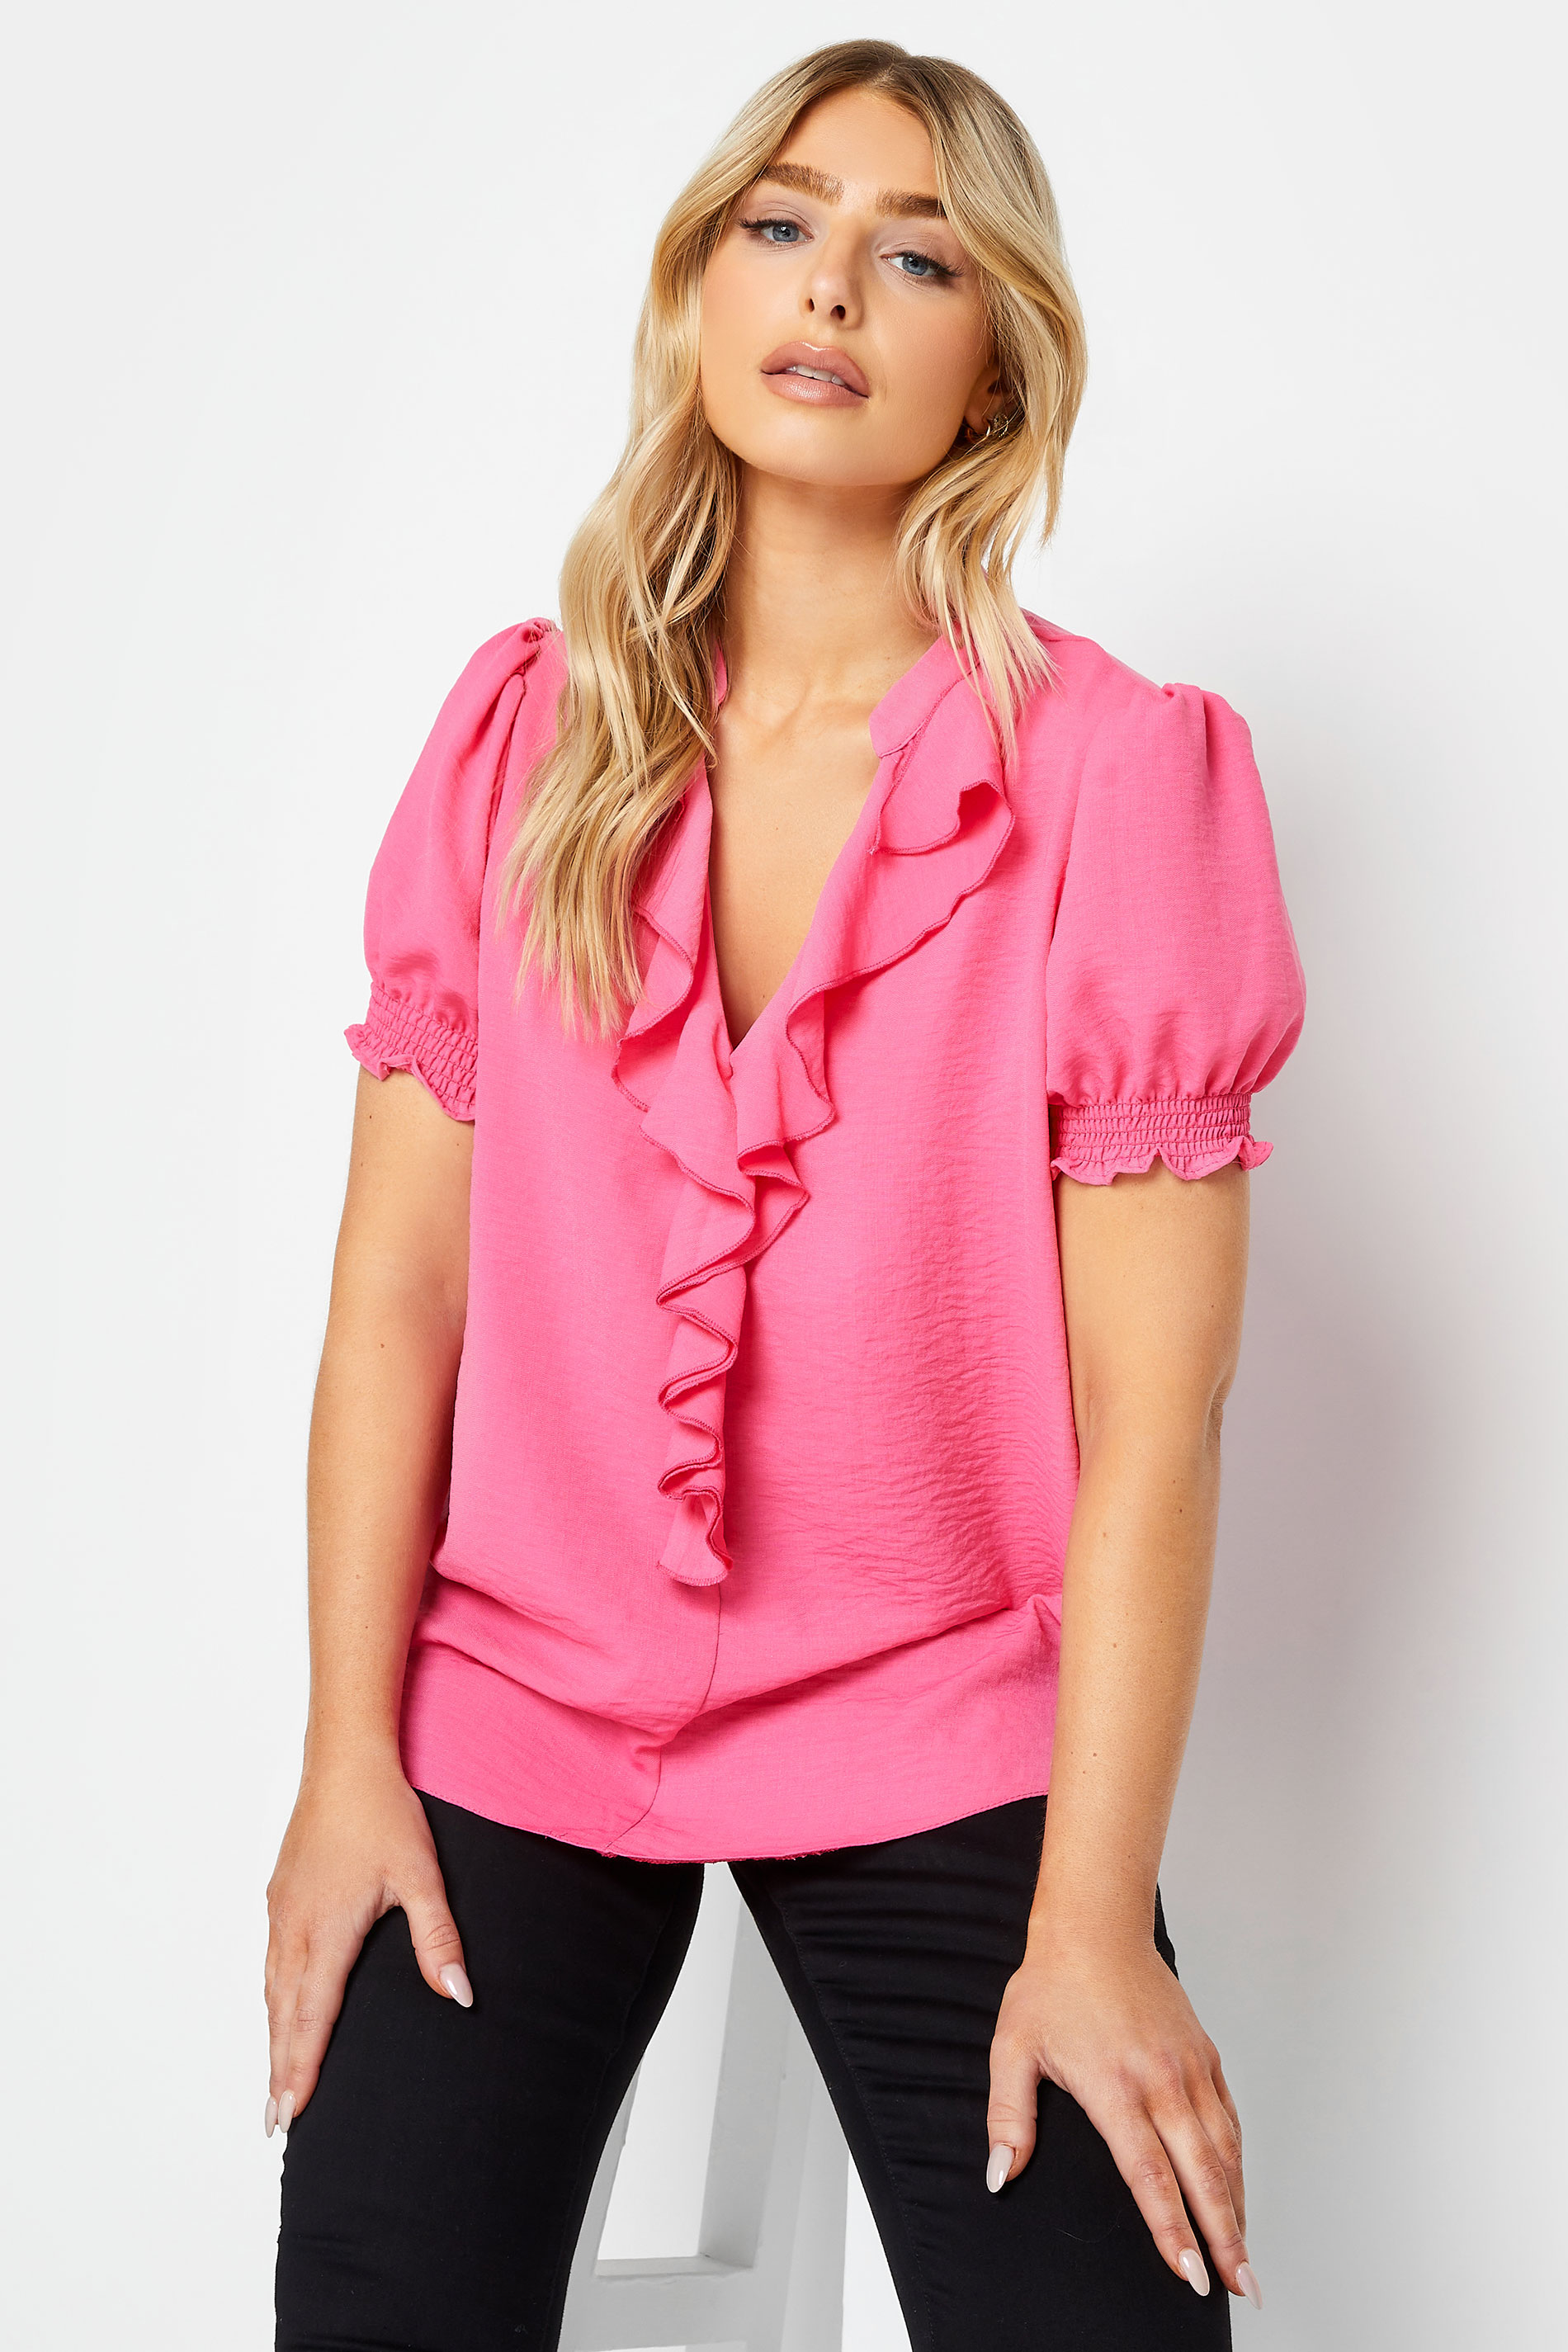 M&Co Pink Frill Front Blouse | M&Co 1